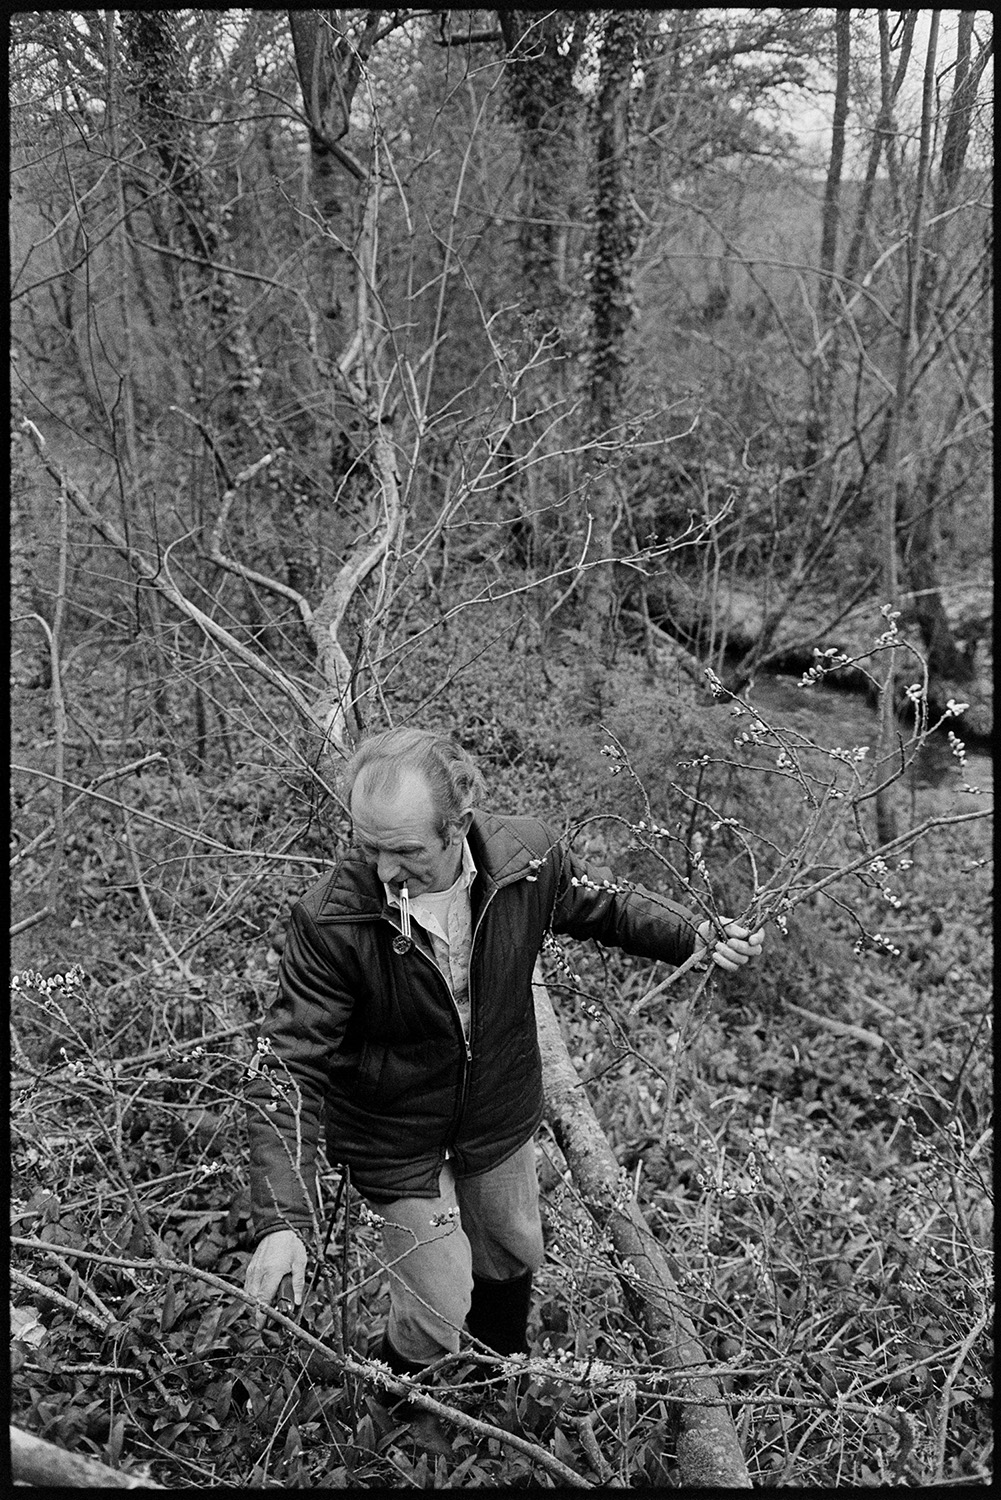 Couple collecting branches and Pussy Willow for Easter decorations in church. 
[Tom Nancekivell collecting branches of pussy willow from a hedge at Combehouse, Dolton, for Easter decoration in the Church. He is smoking a pipe.]